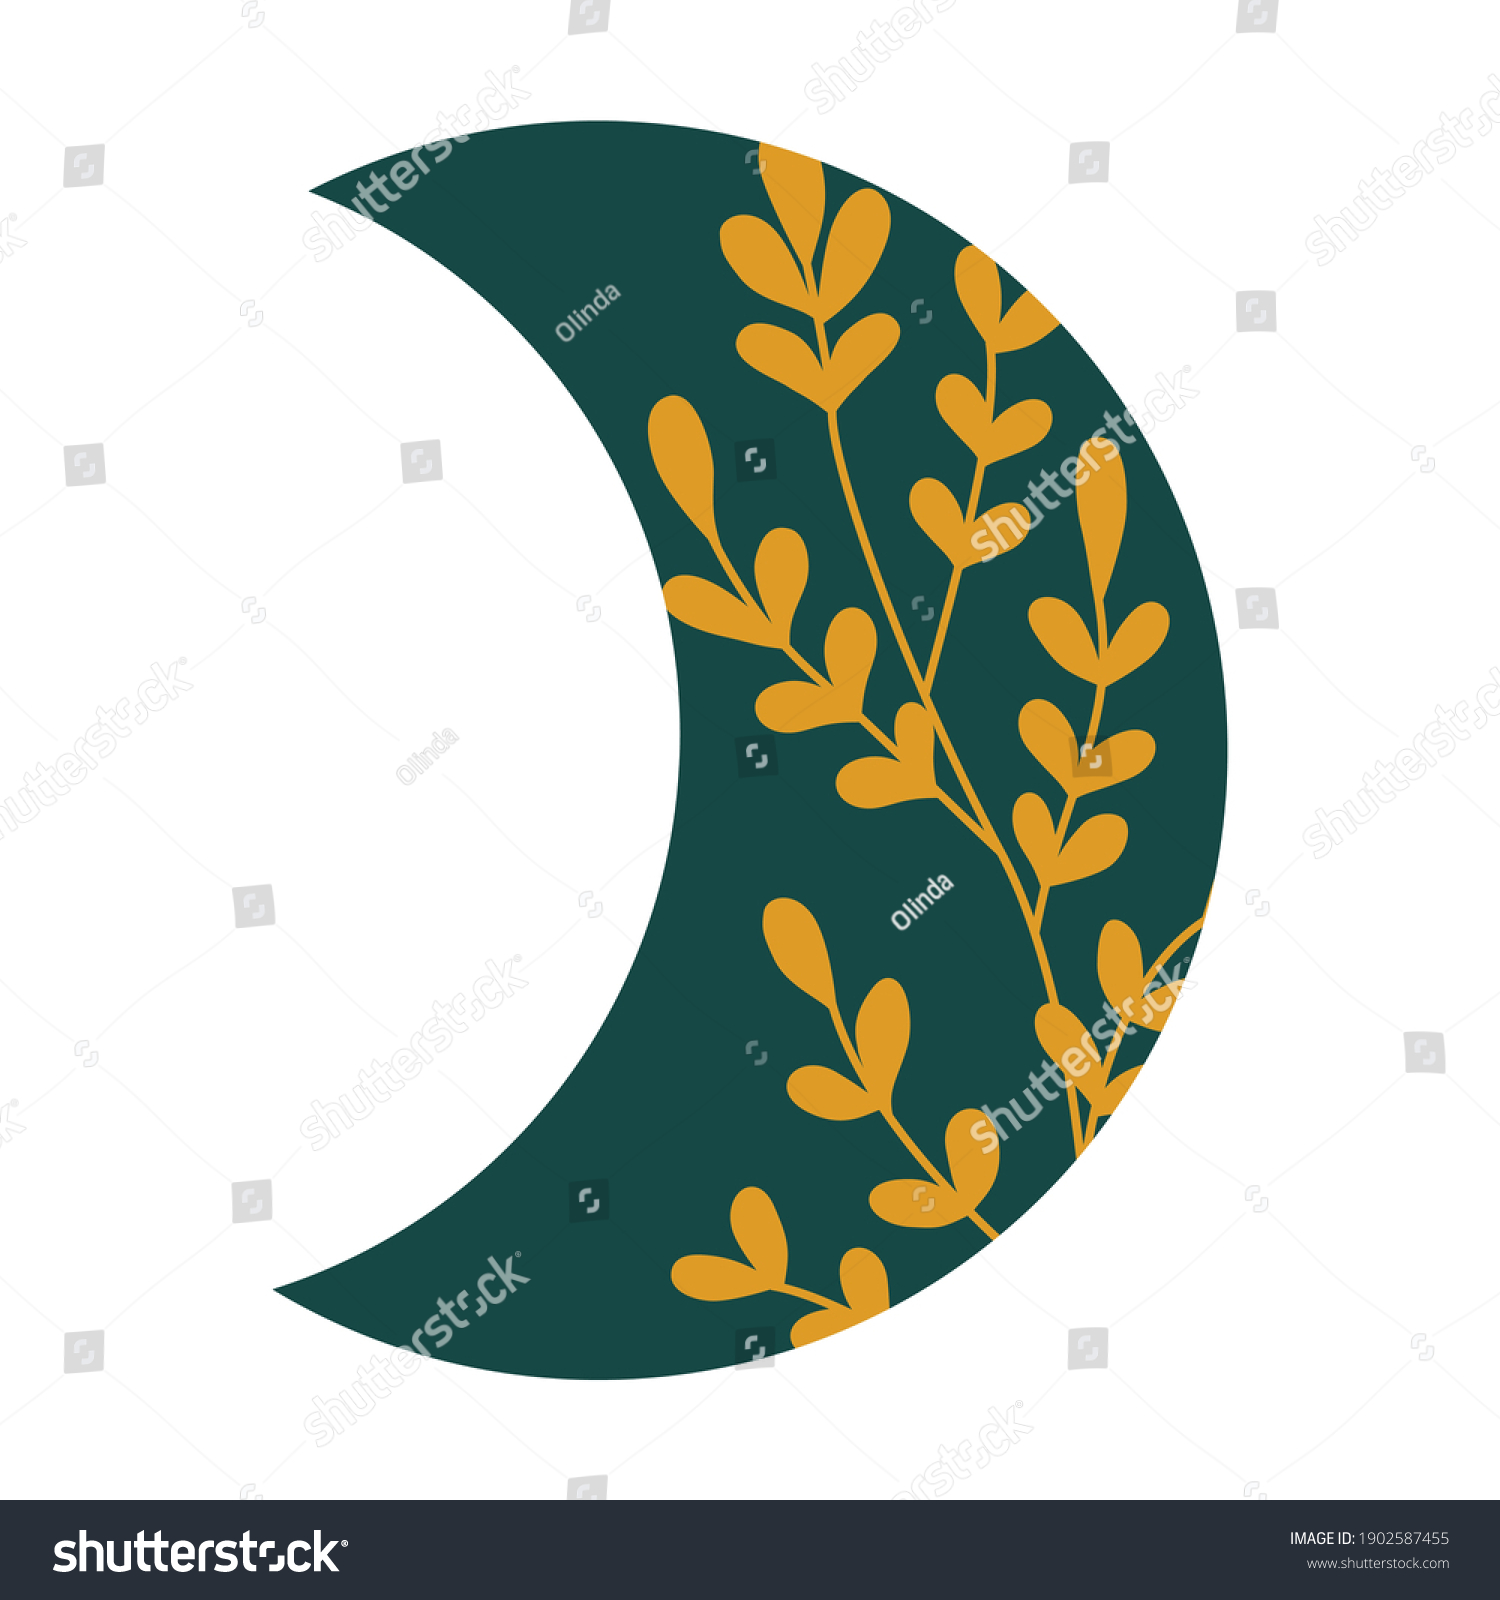 SVG of Royal green crescent moon phase with golden lace floral ornament. Design element for logos icons. Vector illustration. Modern Boho style doodle art svg